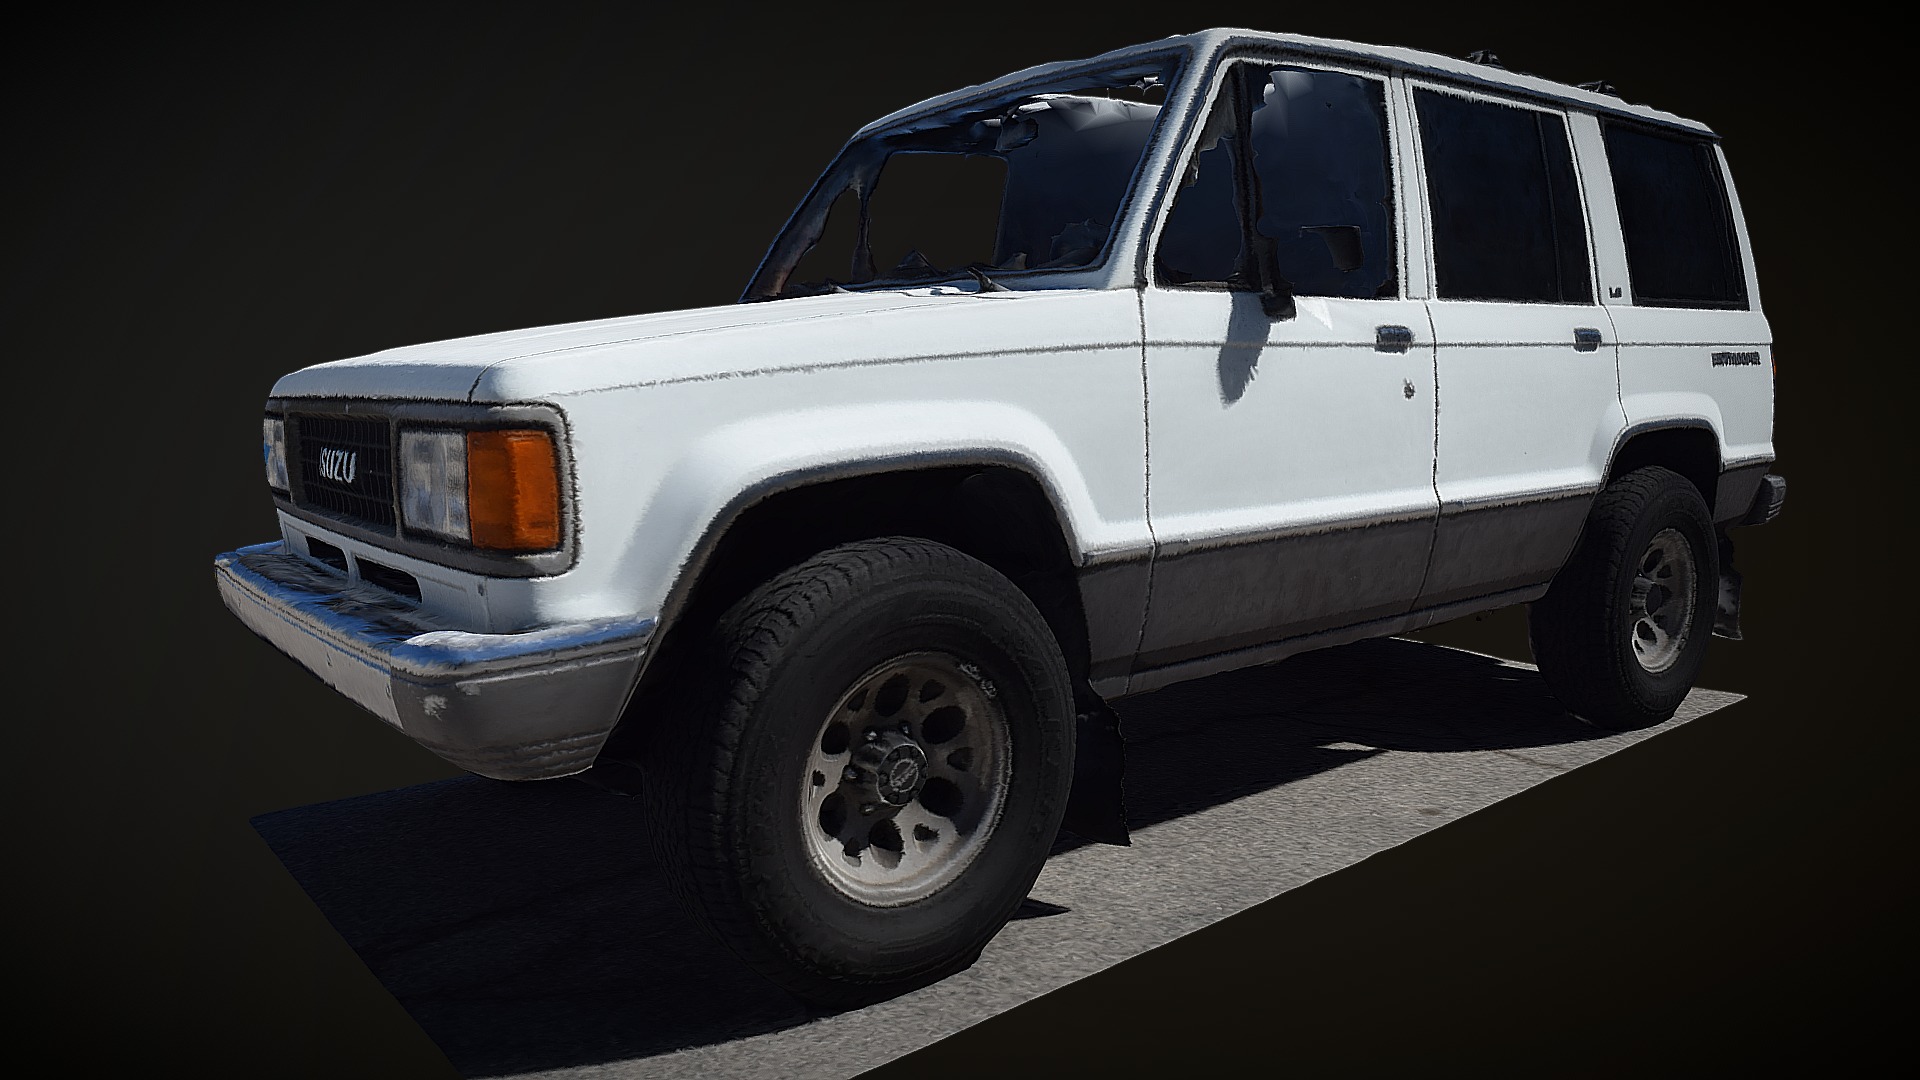 3D model 1989 Isuzu Trooper 4×4 - This is a 3D model of the 1989 Isuzu Trooper 4x4. The 3D model is about a white truck parked.